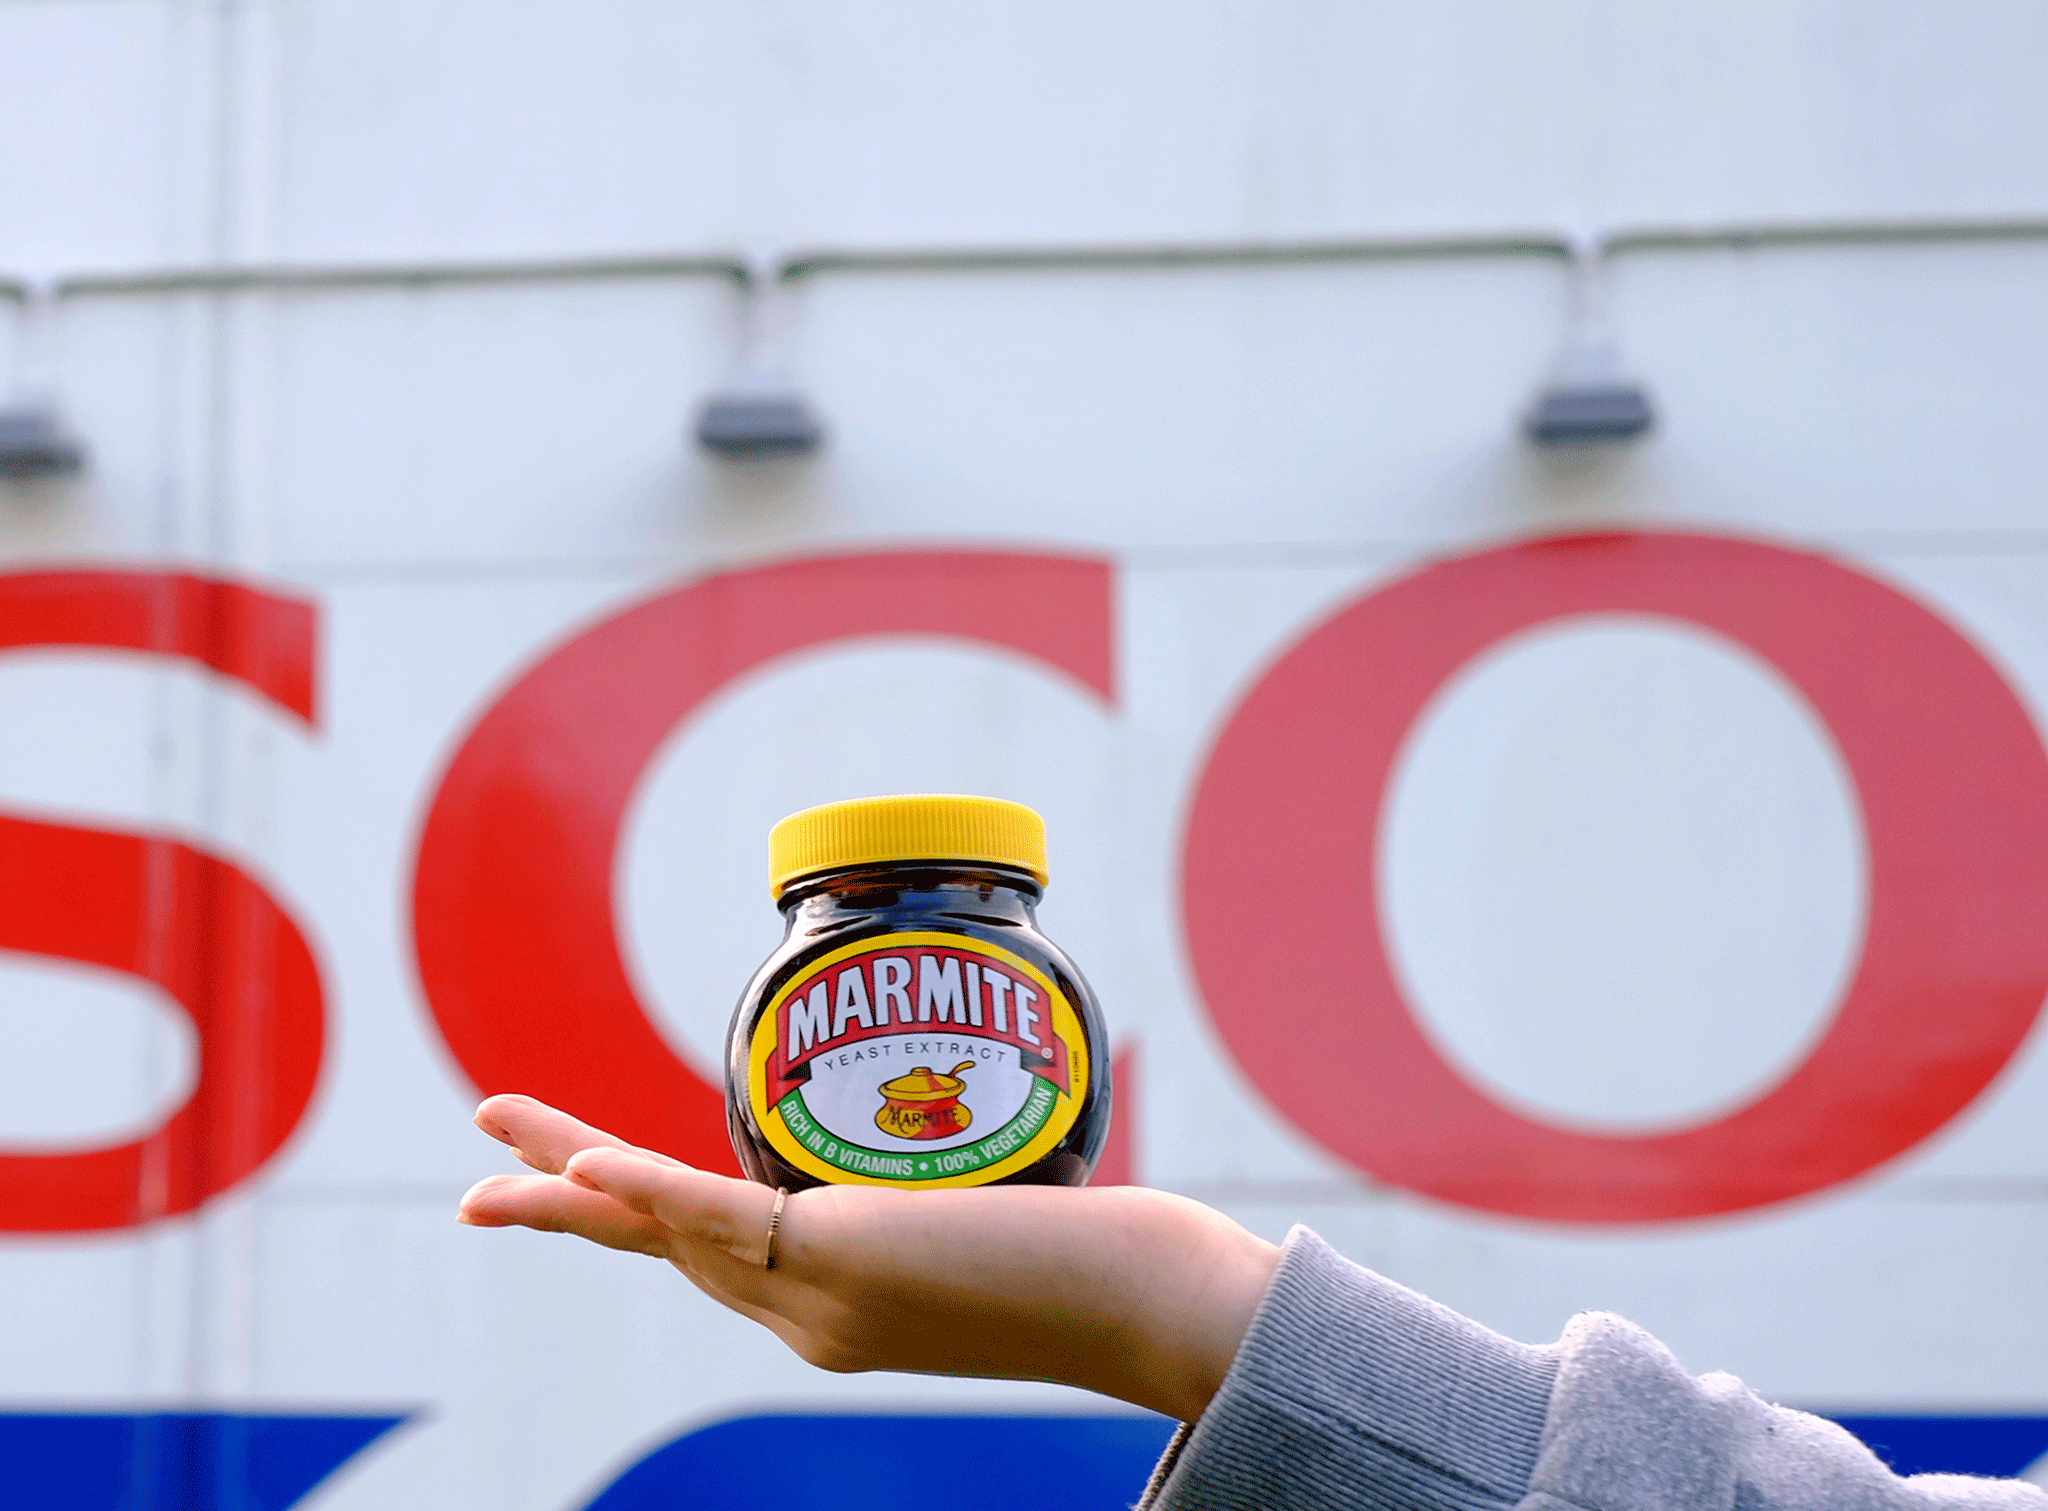 Marmite-gate is over. The real Brexit battle will be harder to settle